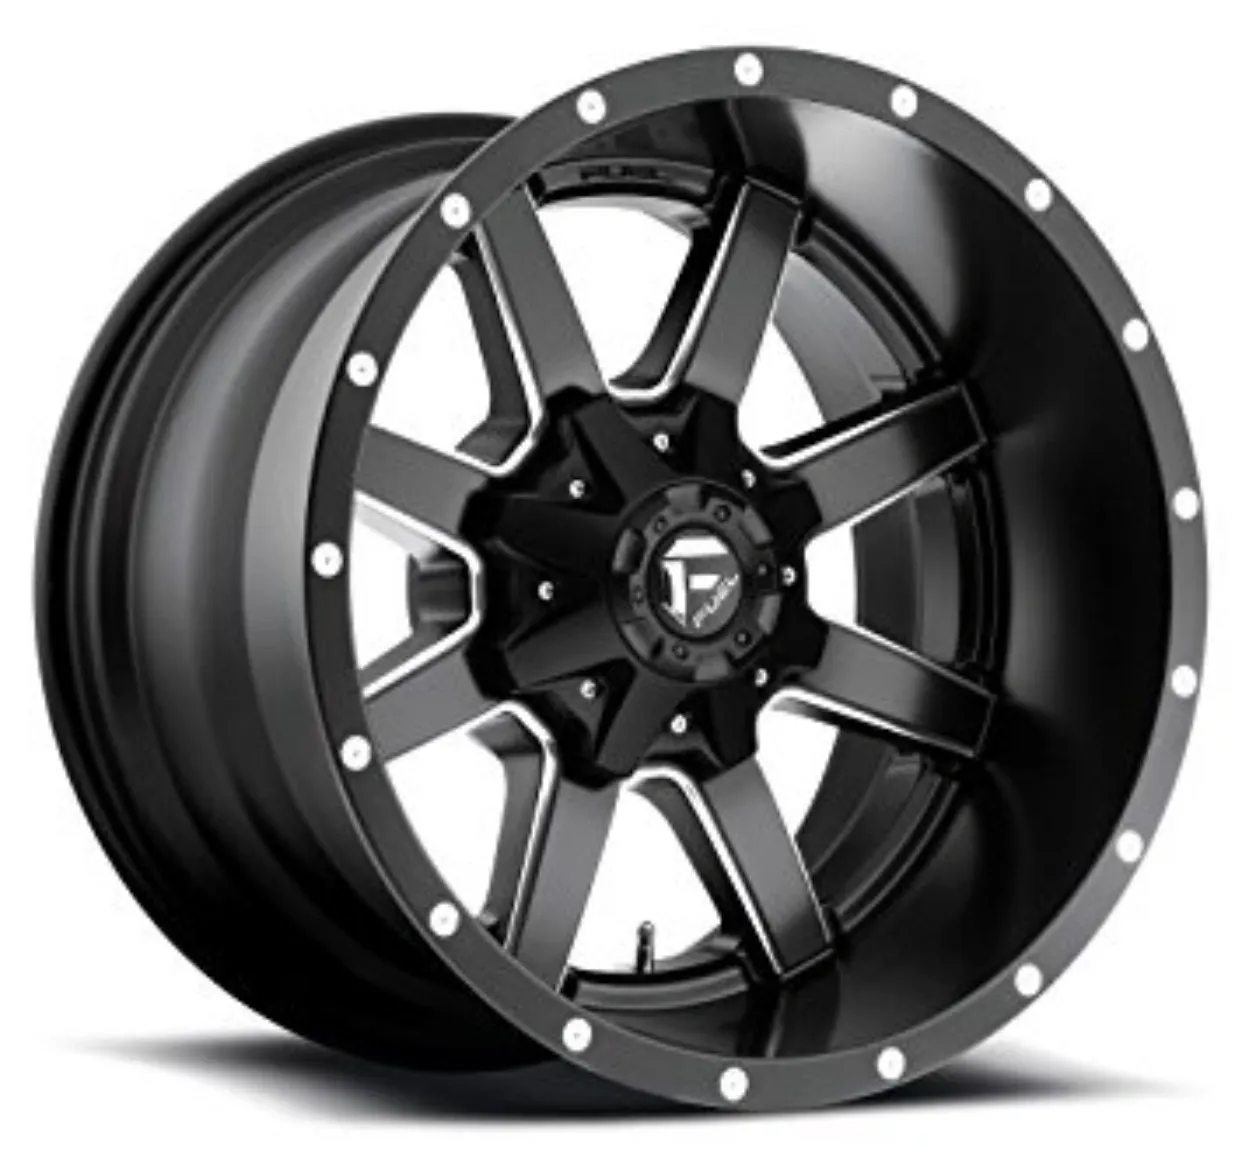 A black and silver truck wheel with a rim.